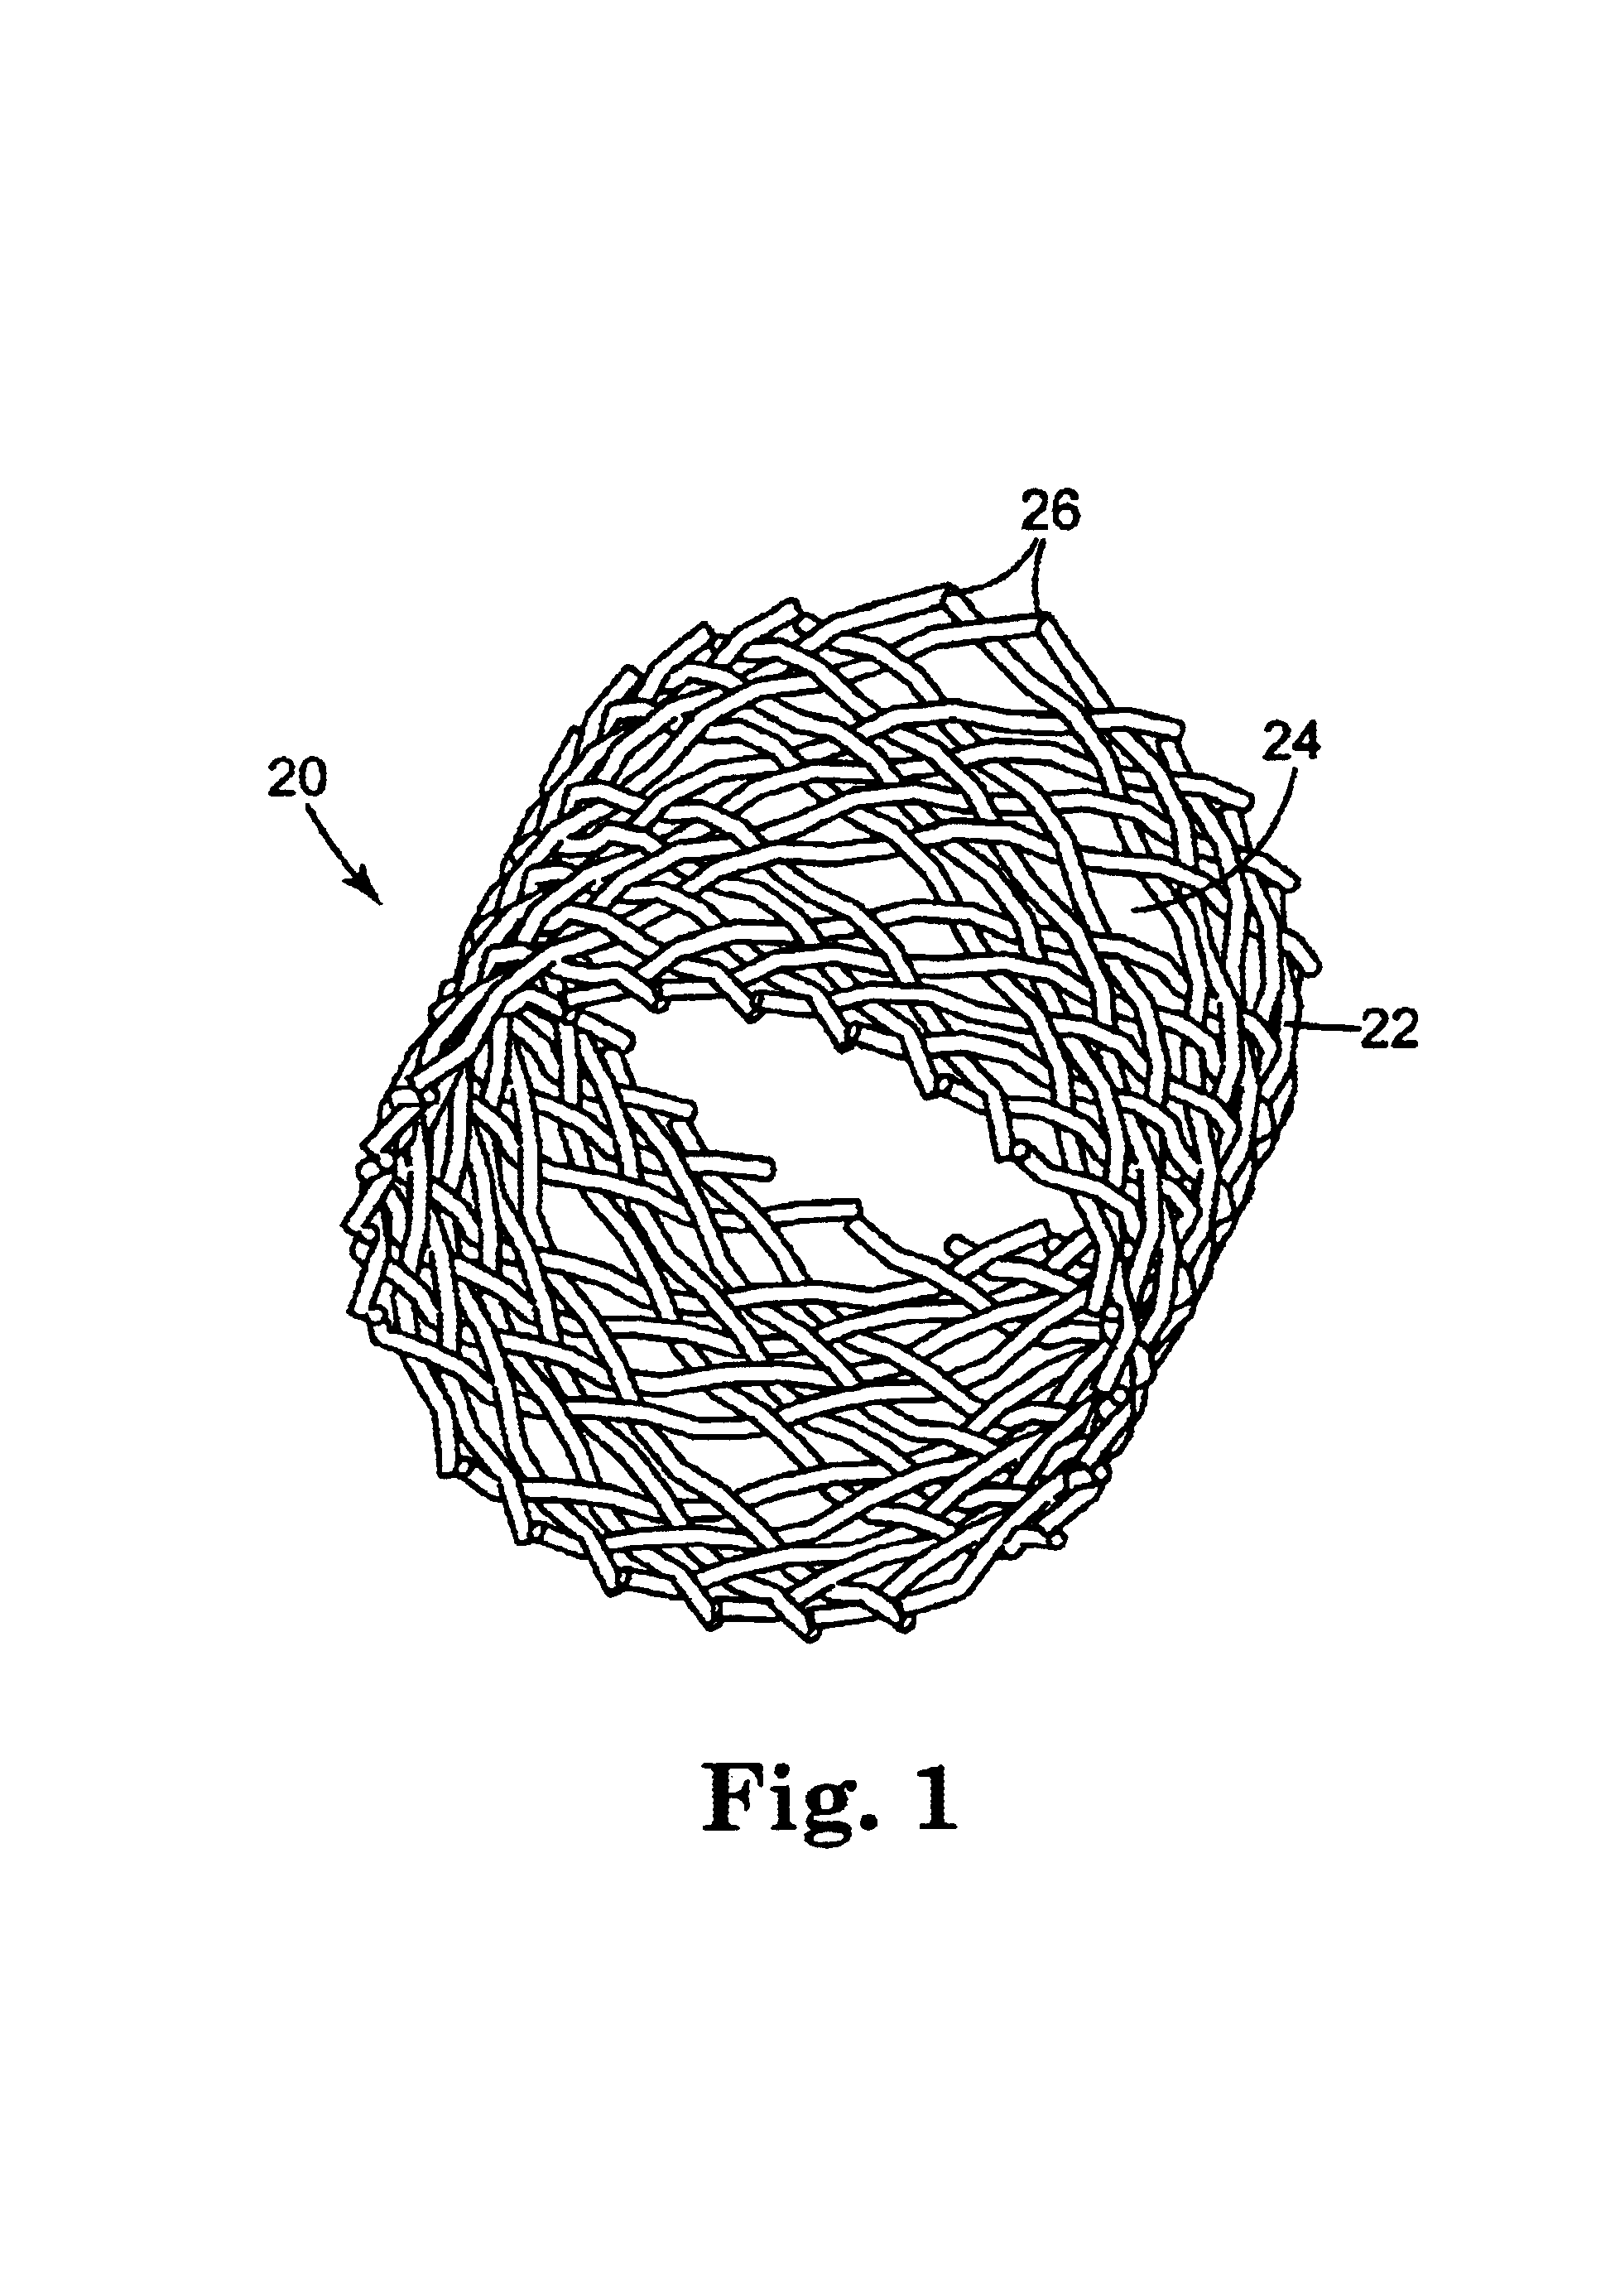 Stent delivery device and method